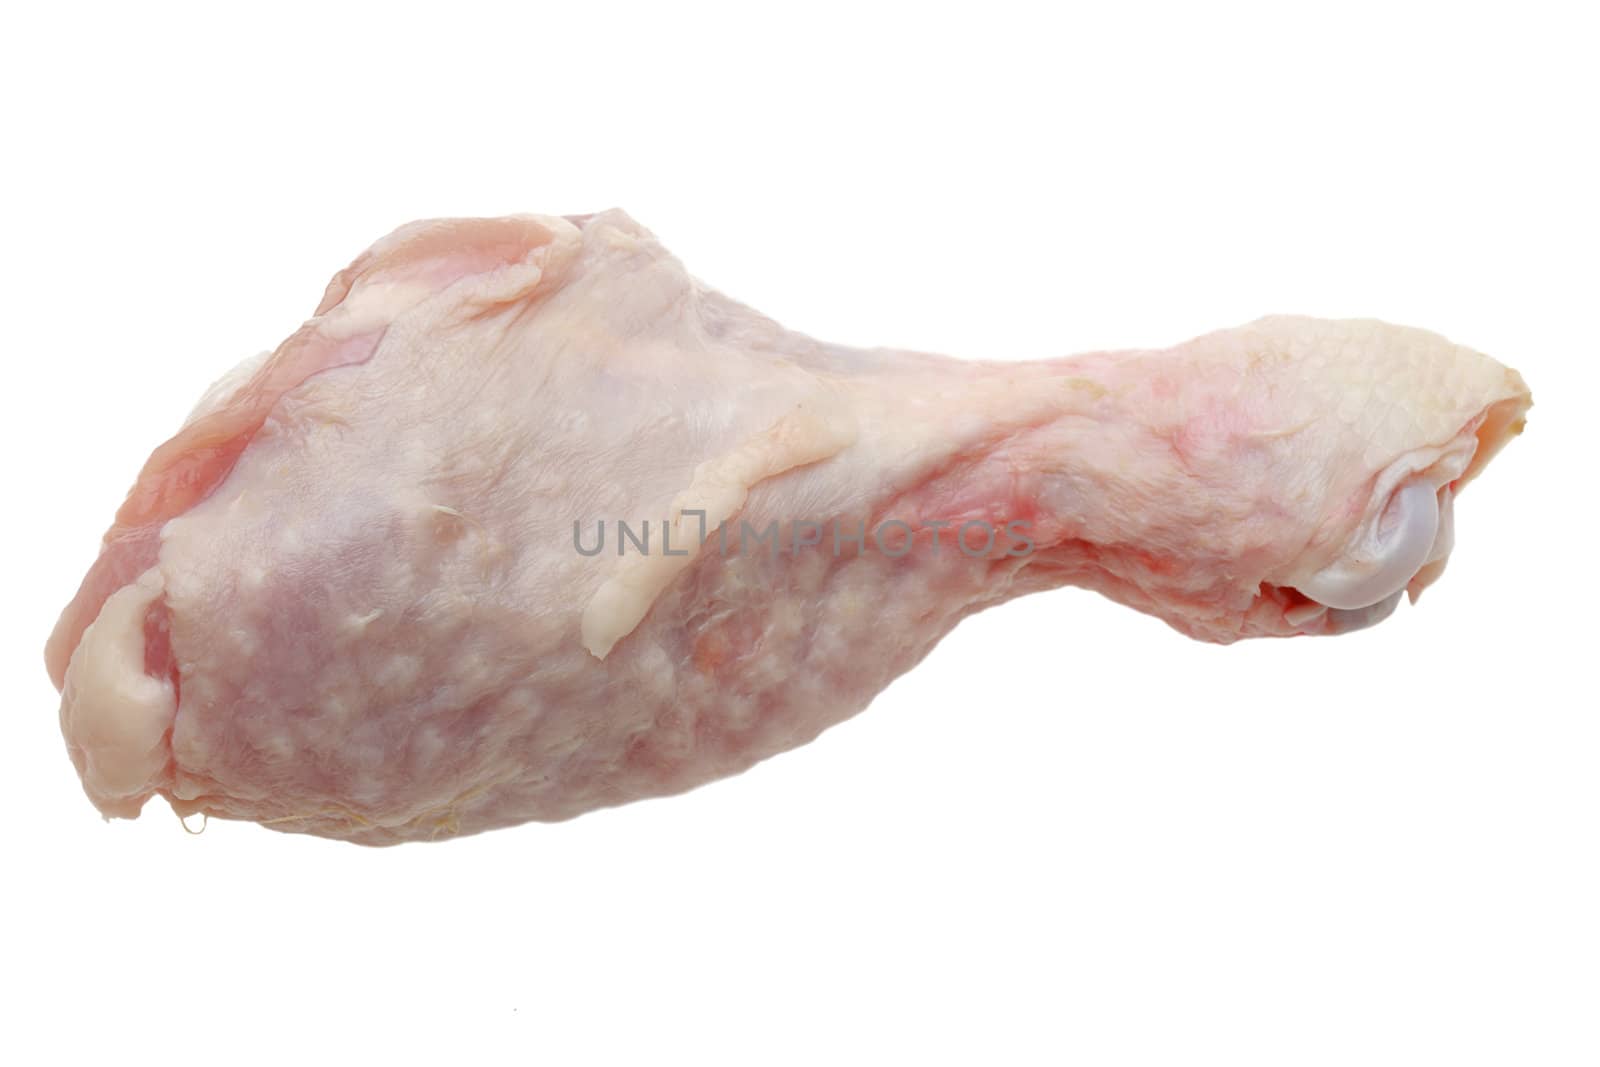 Image of a raw drumstick isolated against a white background.